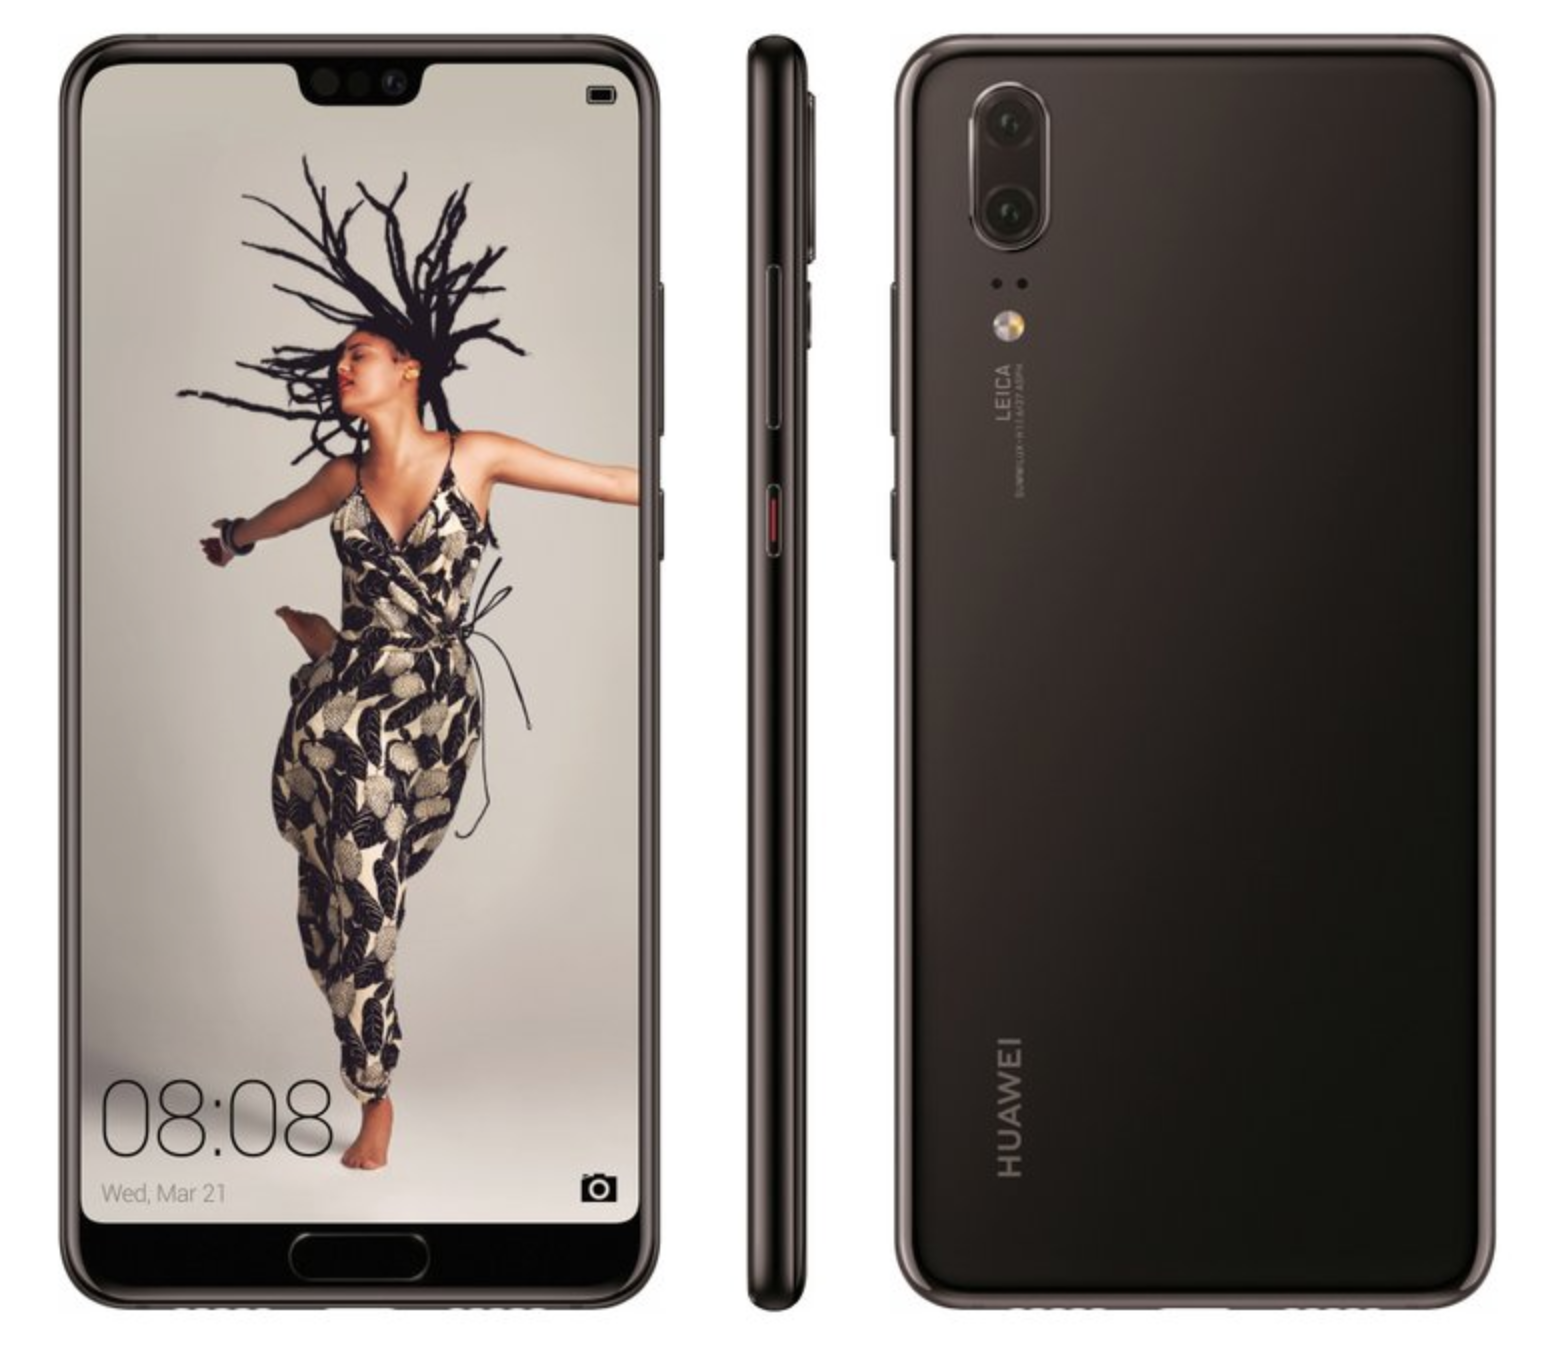 What will the Huawei P20 look like?